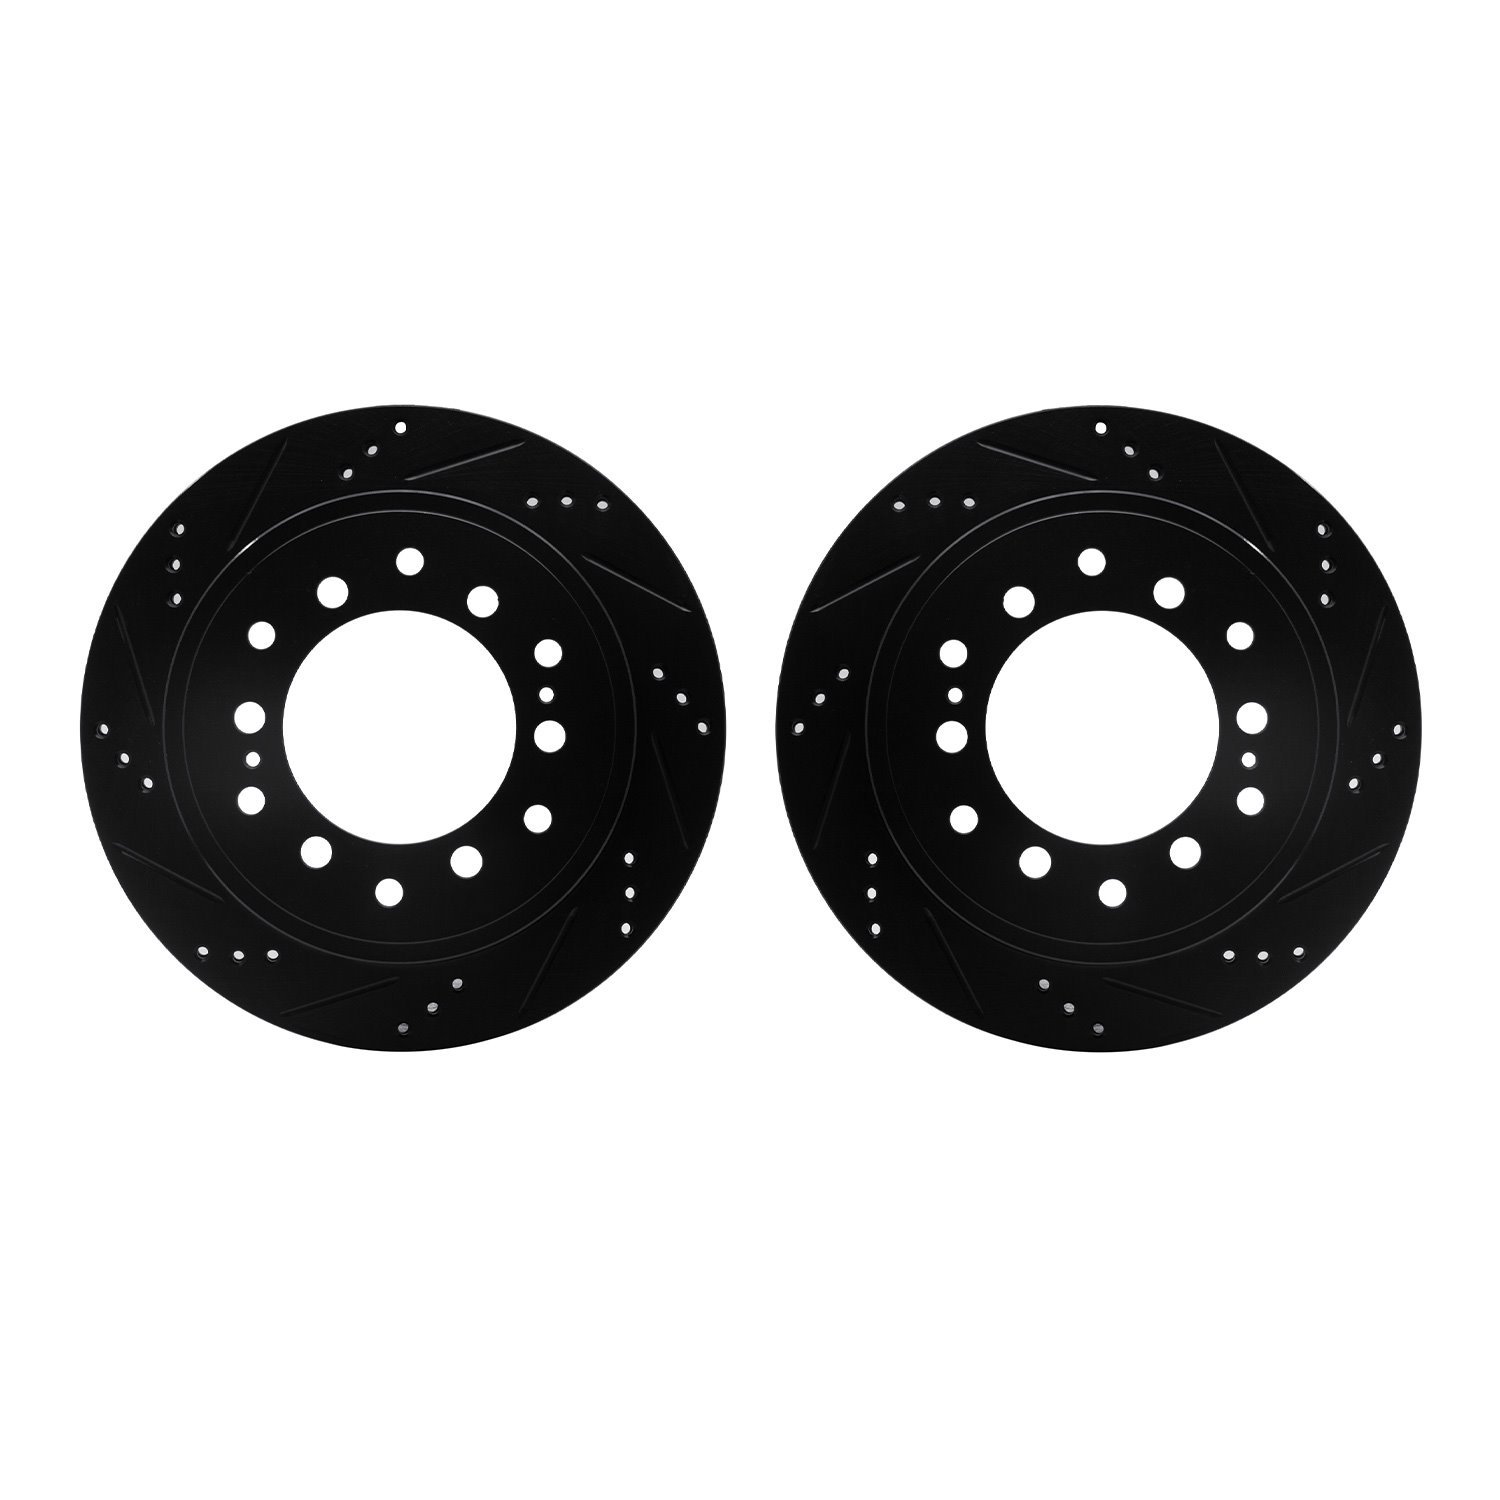 8002-76111 Drilled/Slotted Brake Rotors [Black], Fits Select Lexus/Toyota/Scion, Position: Rear